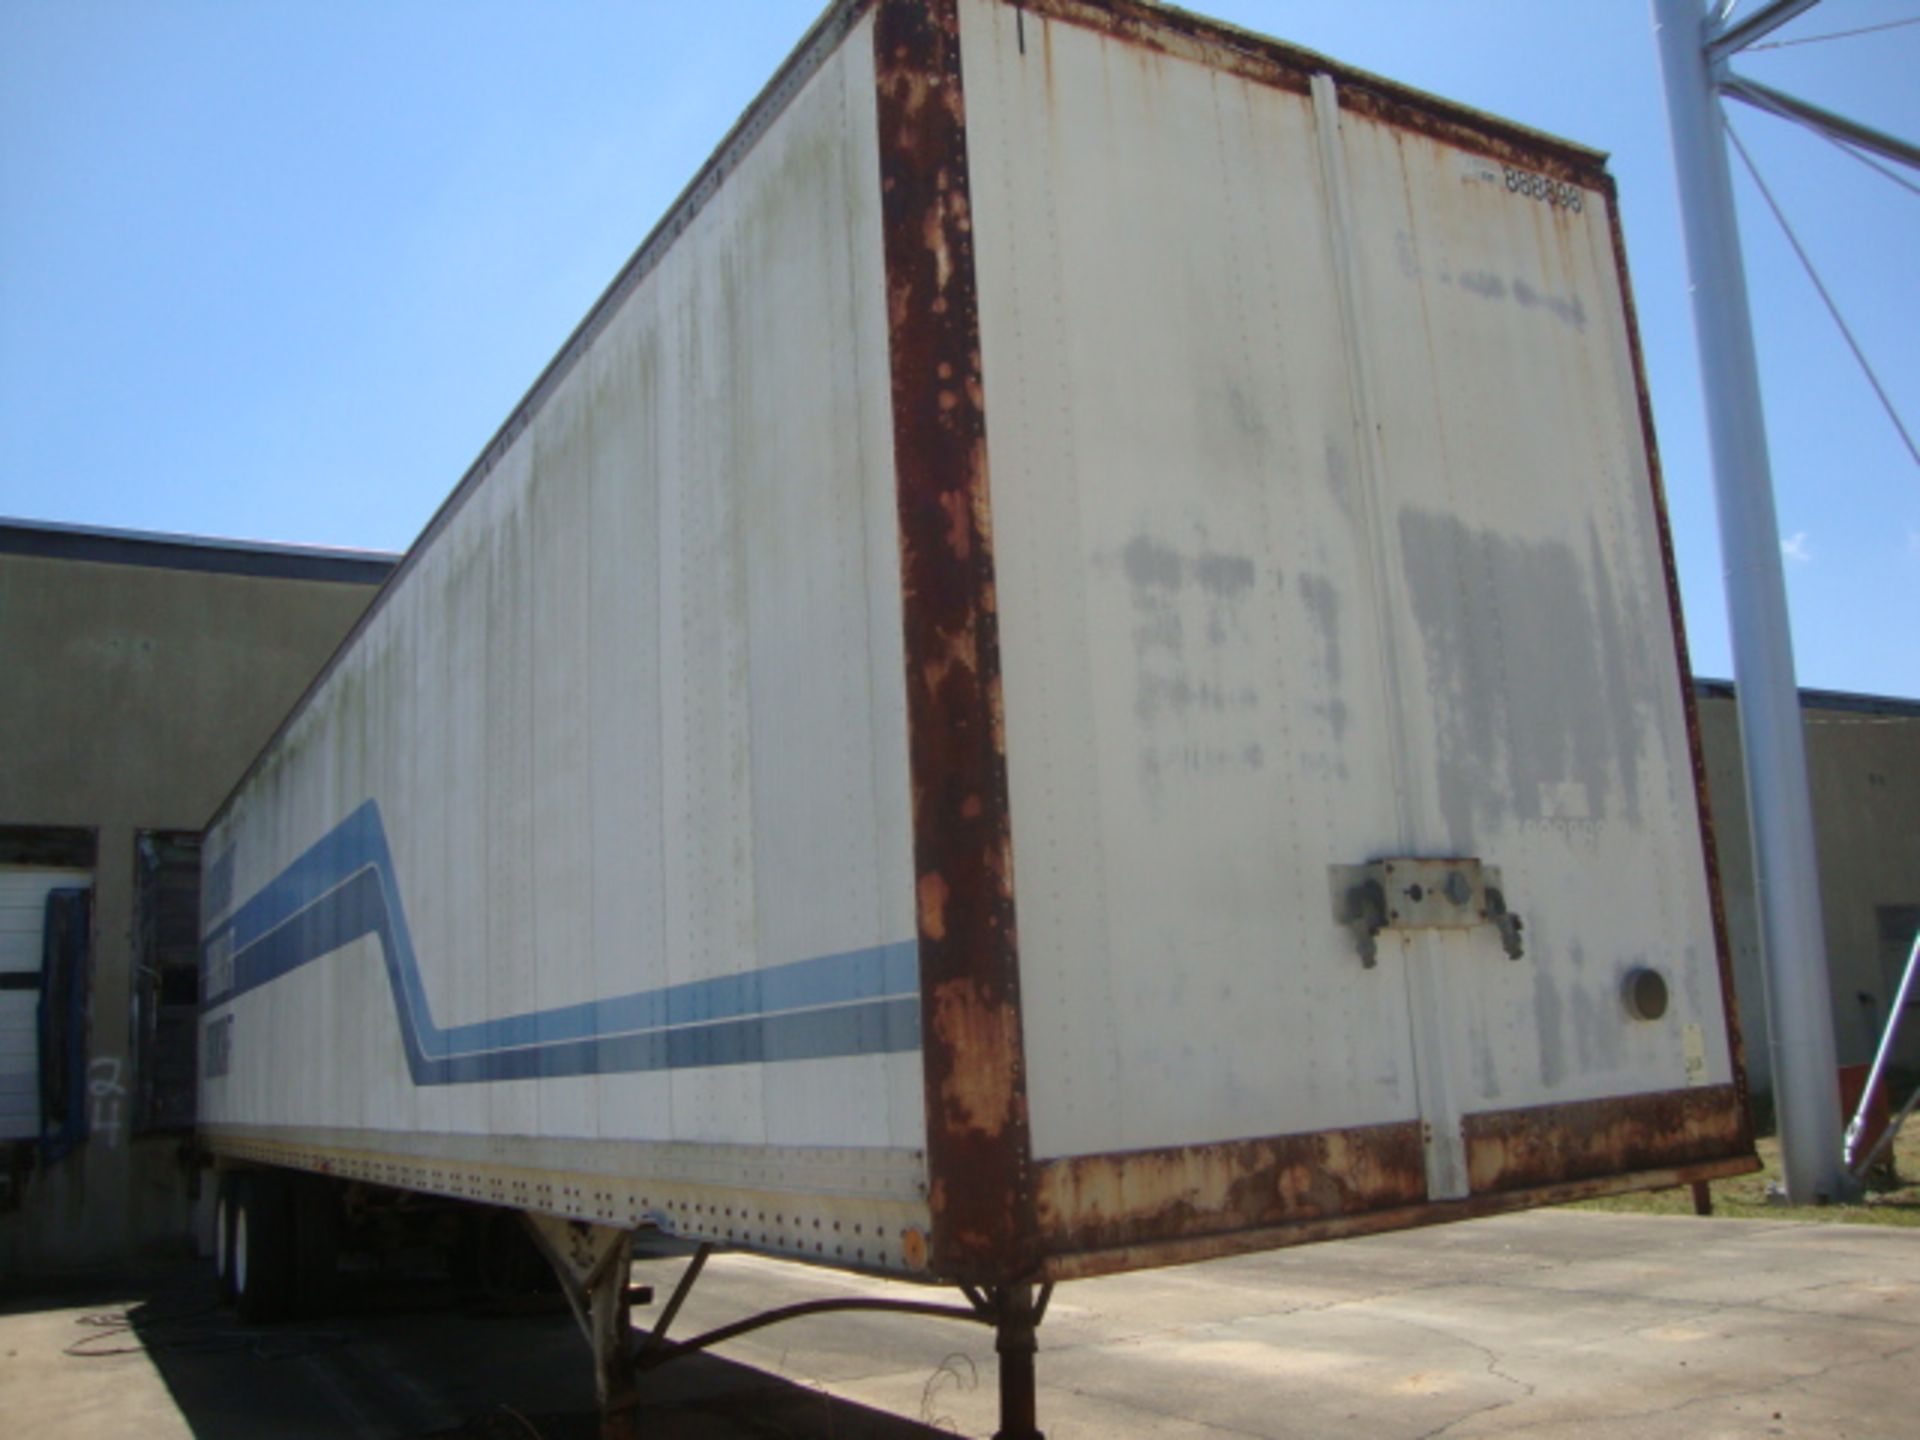 BOX TRAILER, STRICK 42', tandem axle, Trailer I.D. No. 888898 (no title - yard us only) - Image 2 of 2